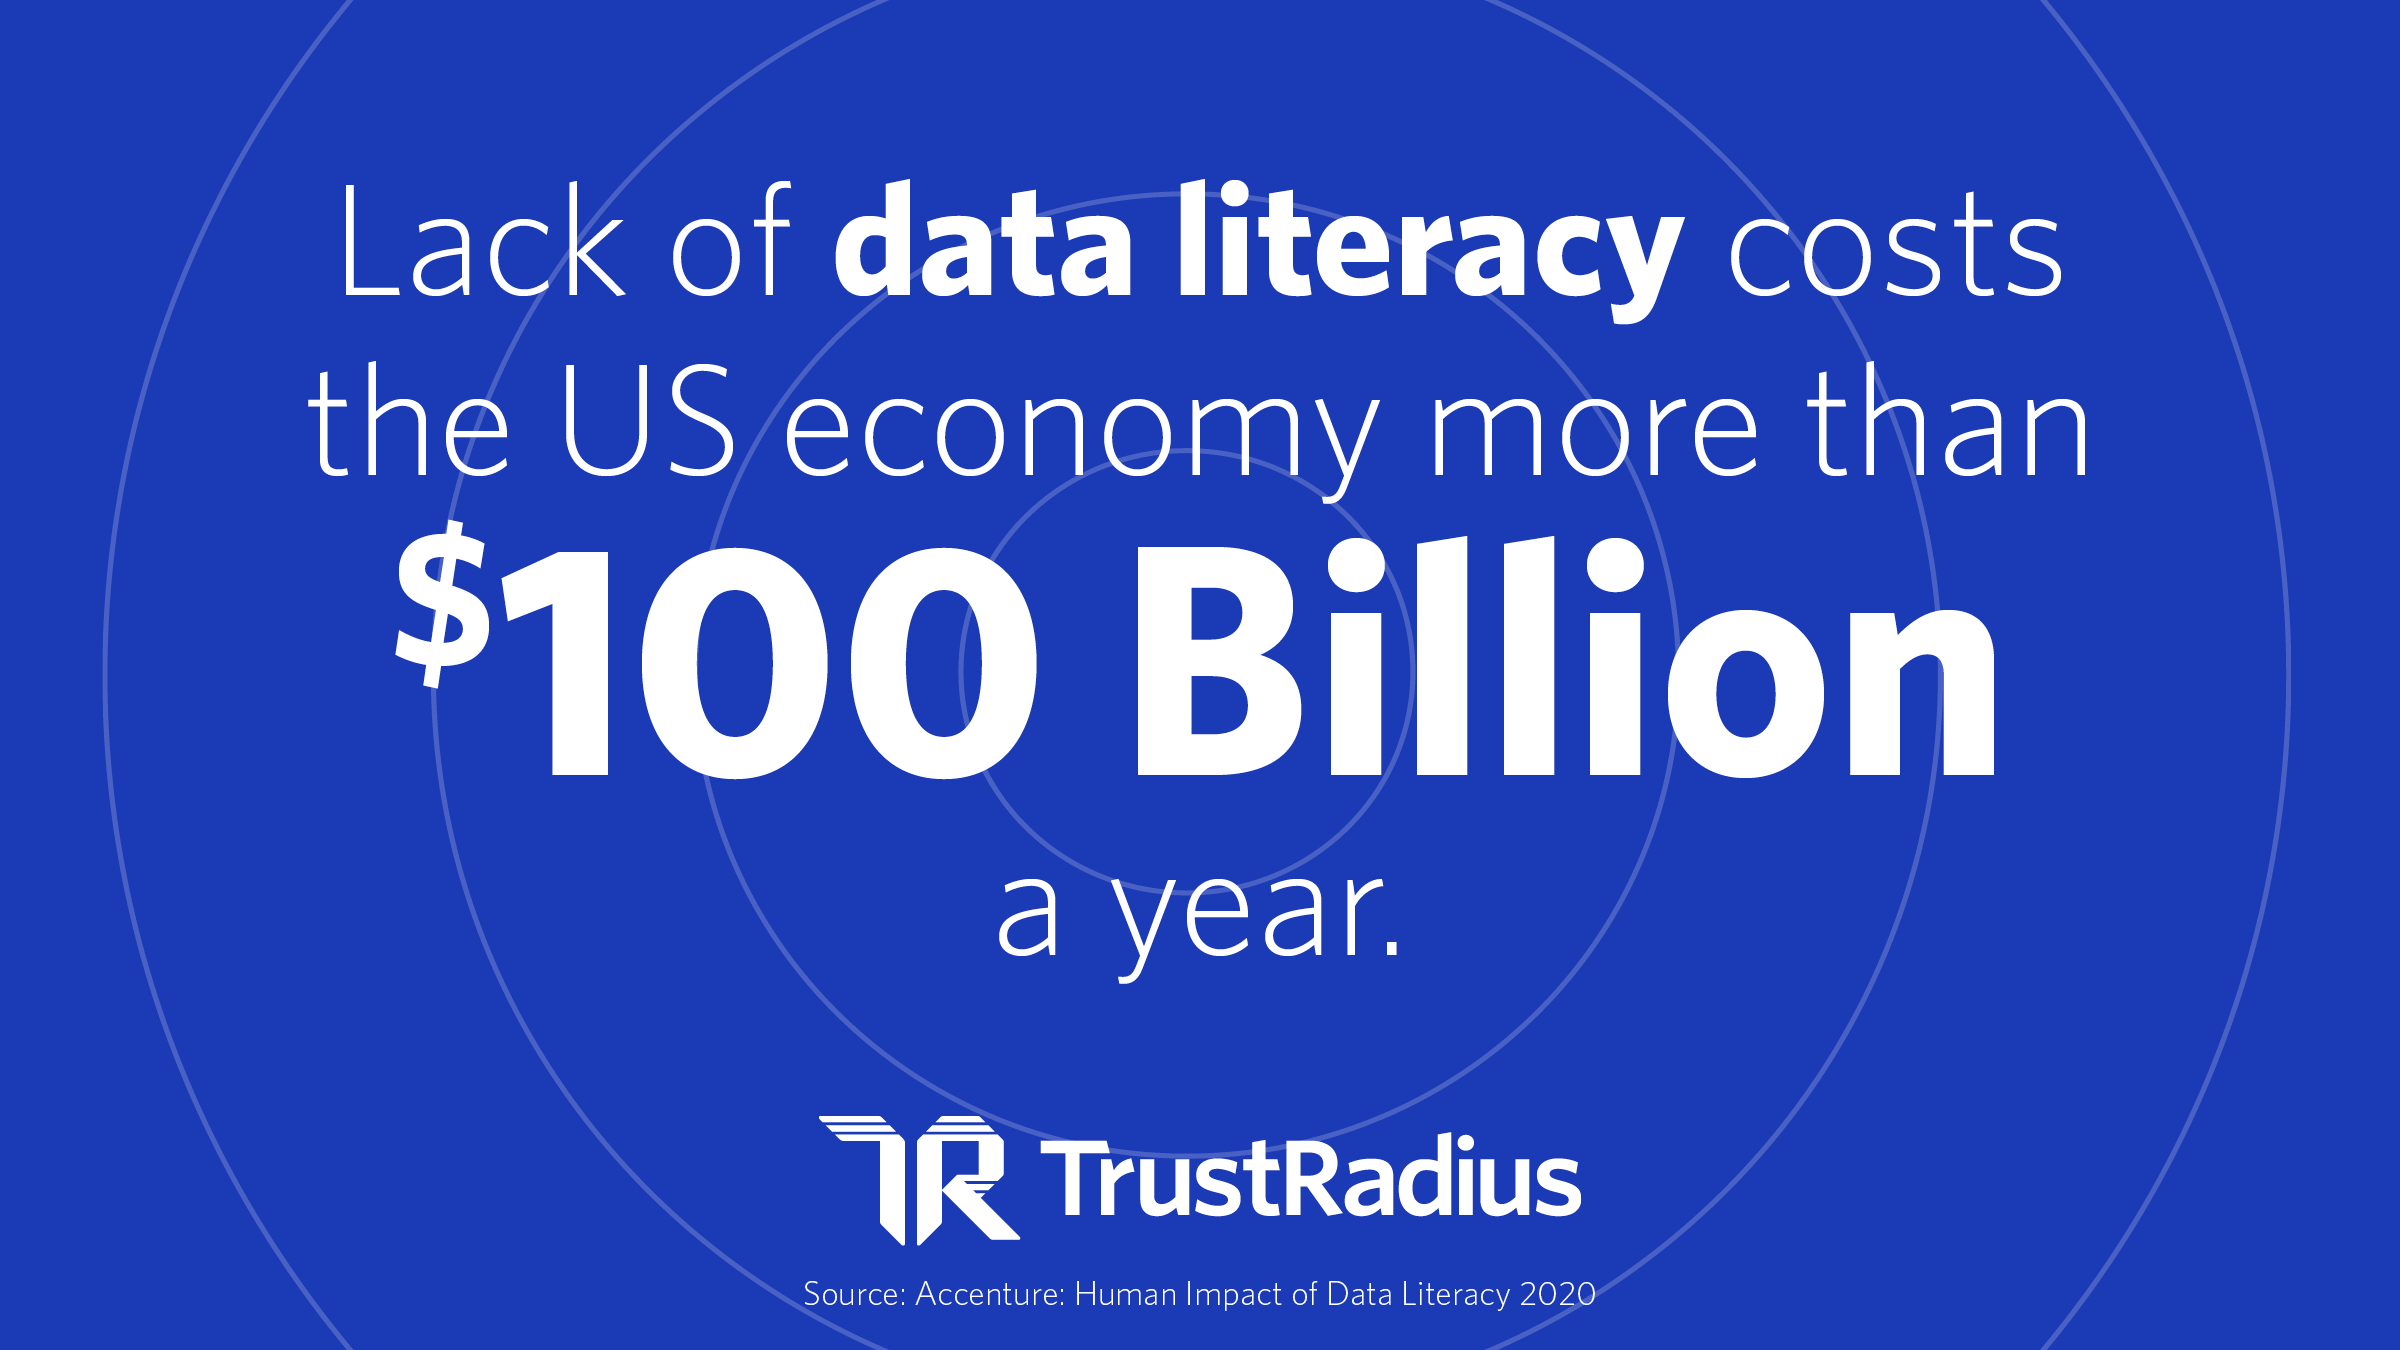 Lack of data literacy costs the us economy more than 100 Billion dollars a year